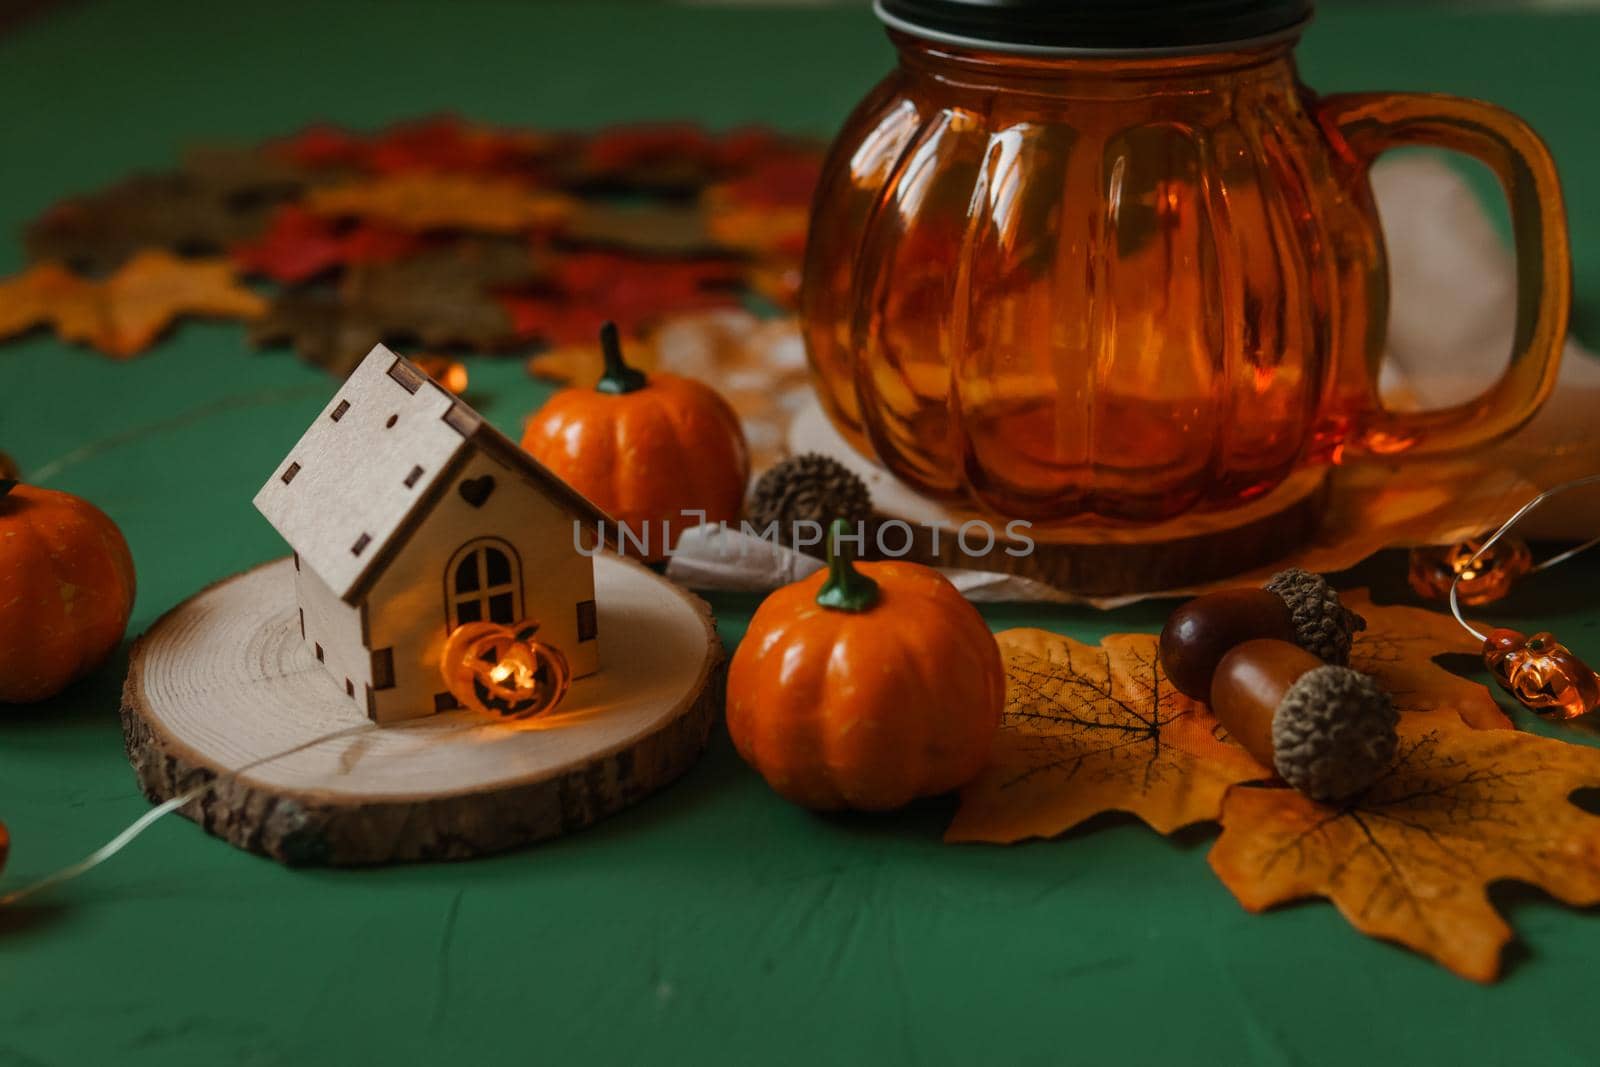 Autumn decor in the theme of the Halloween holiday by Annu1tochka